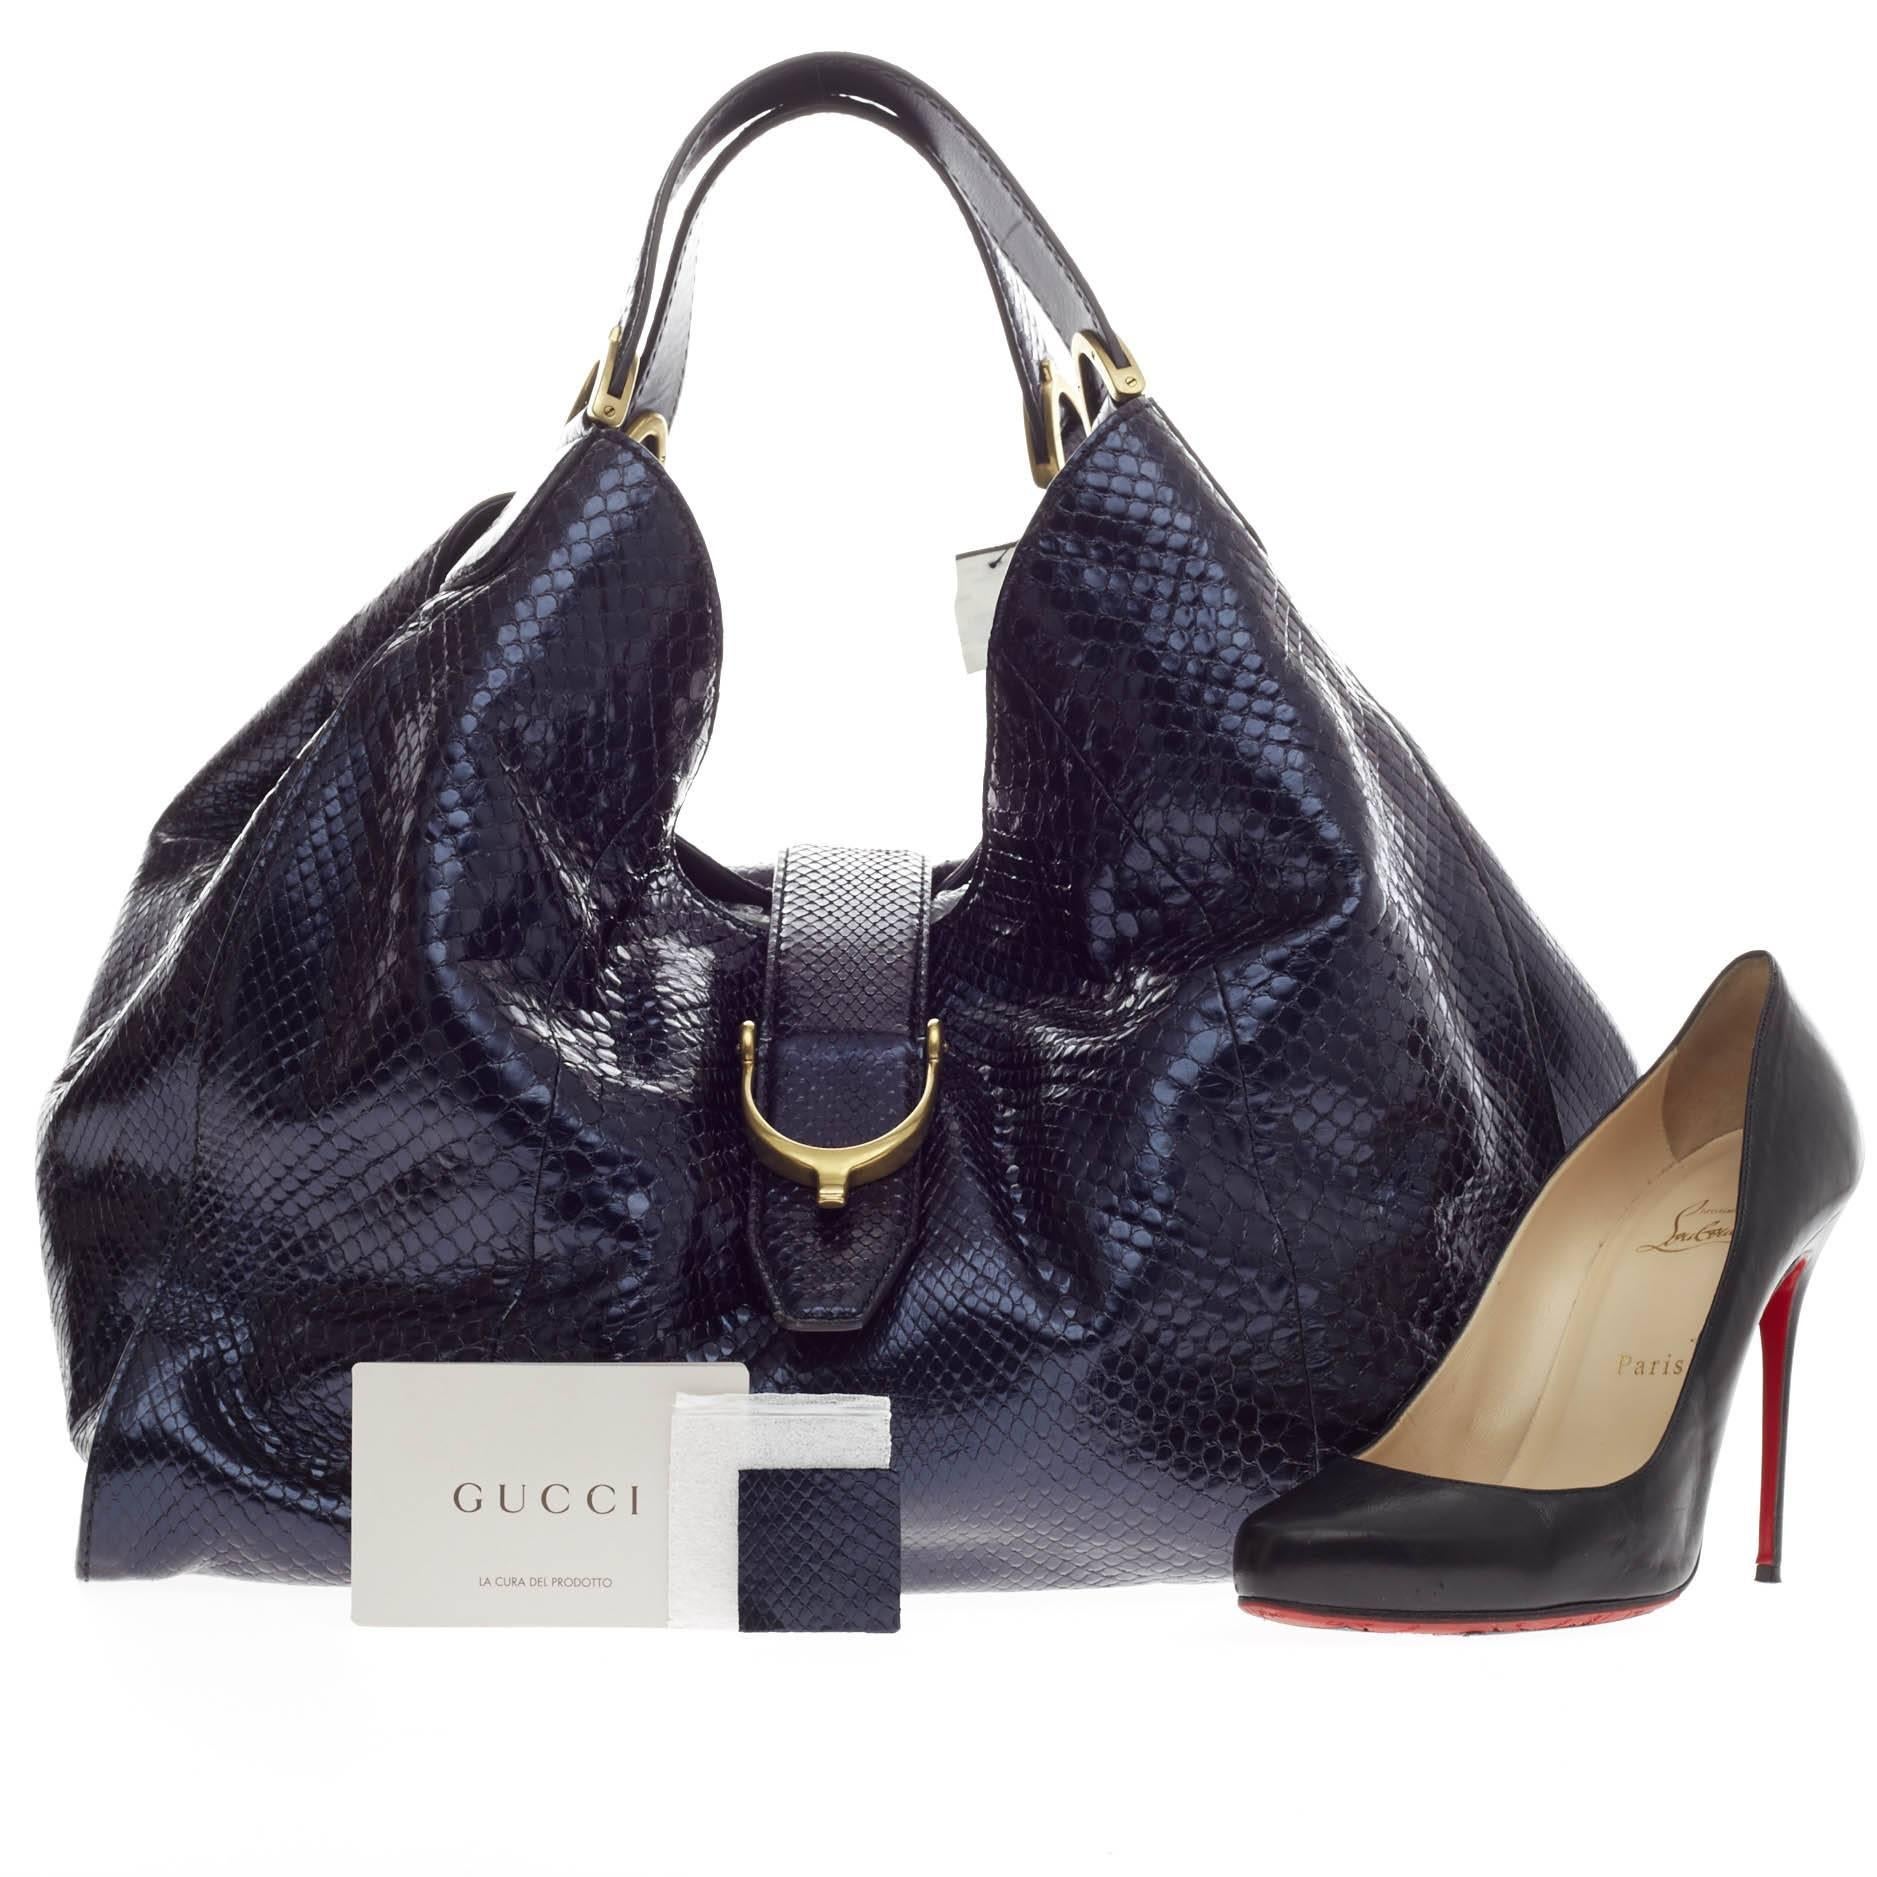 This authentic Gucci Soft Stirrup Tote Python Large in minimalist design is ideal for all season. Crafted in midnight blue python skin, this chic hobo-style shoulder bag features side to side looped dual-flat handles with unique spur detailing and